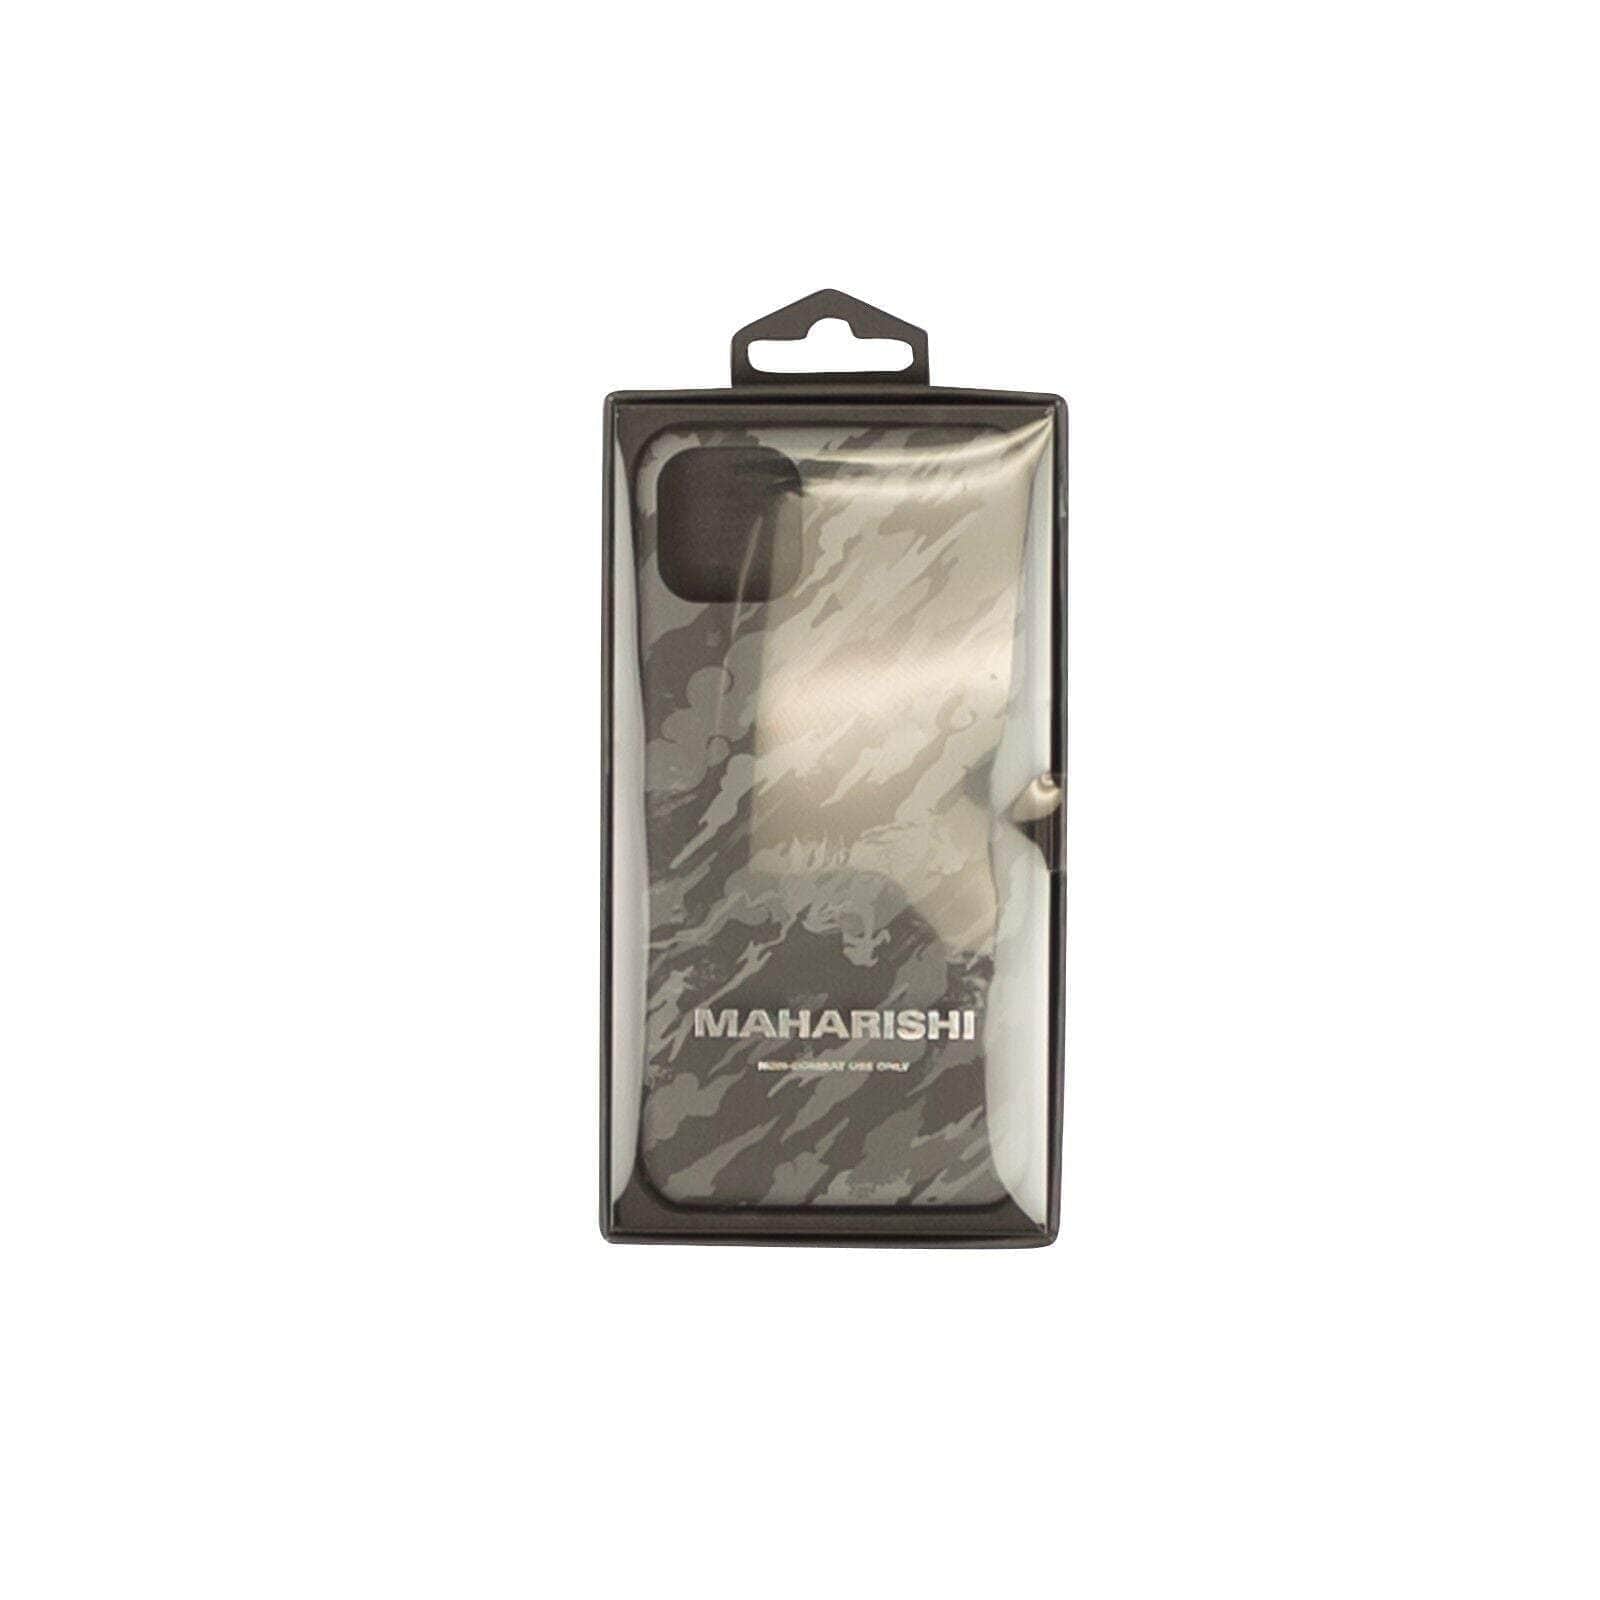 Maharishi channelenable-all, chicmi, couponcollection, gender-mens, gender-womens, maharishi, main-accessories, mens-shoes, phone-tablet-cases, size-os, under-250 OS Grey iPhone 11 Pro Max Knight Phone Case 95-MSI-3007/OS 95-MSI-3007/OS